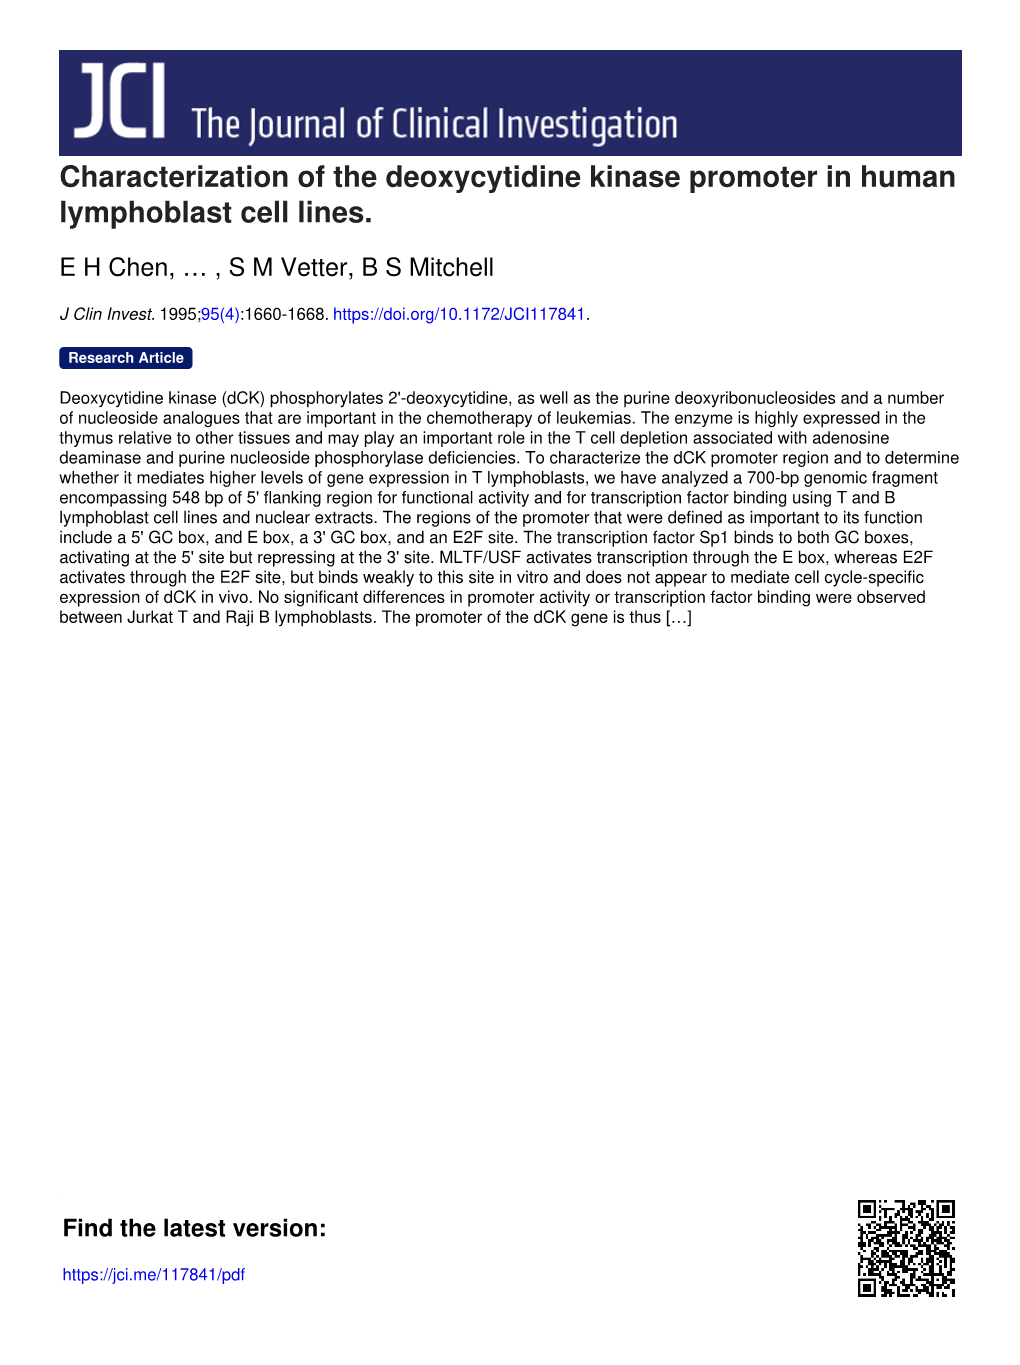 Characterization of the Deoxycytidine Kinase Promoter in Human Lymphoblast Cell Lines